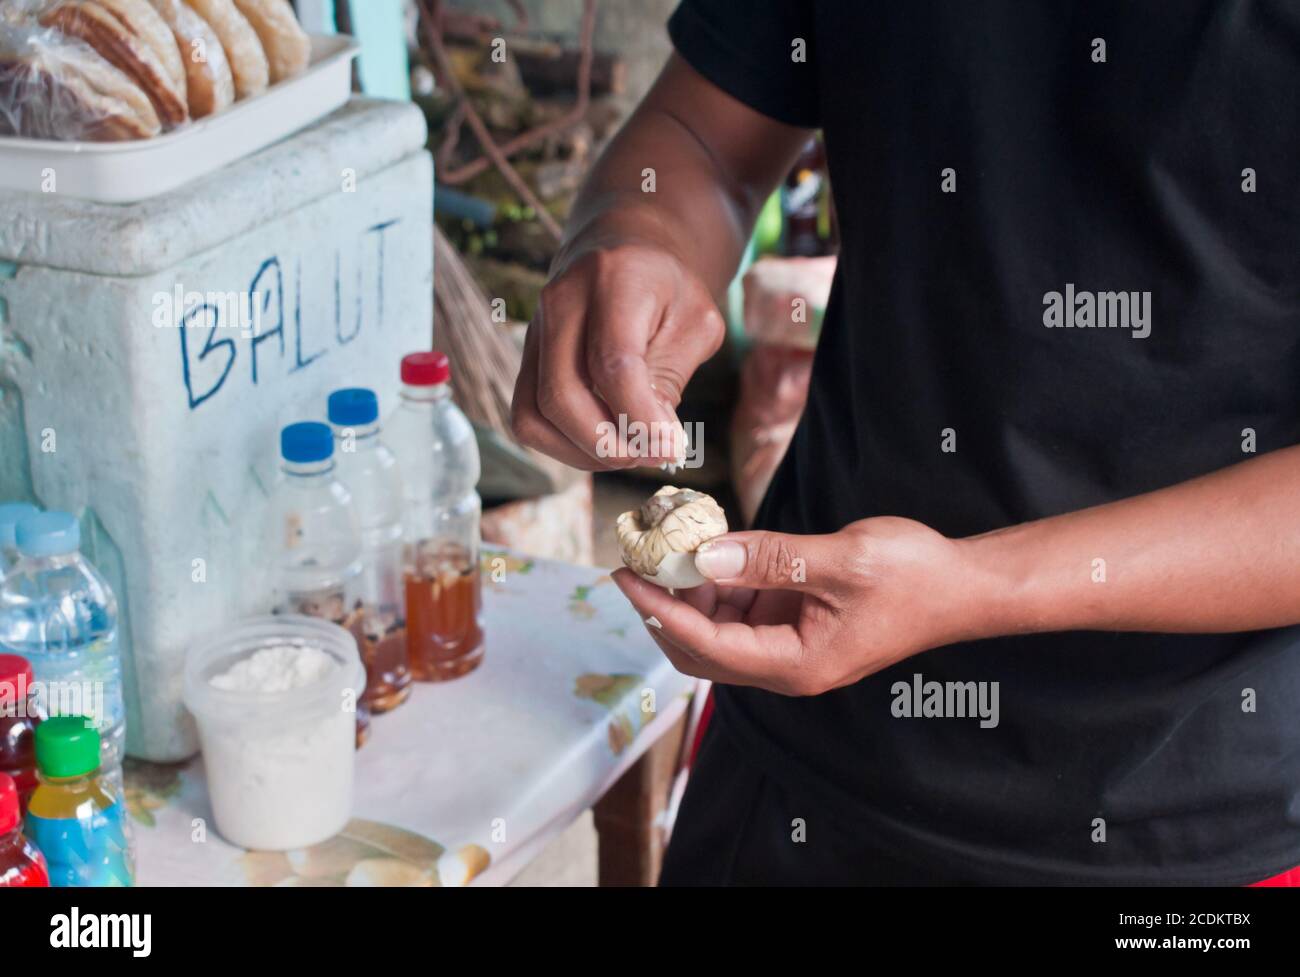 Balut - breeded, cooked duck-eggs, Philippines Stock Photo